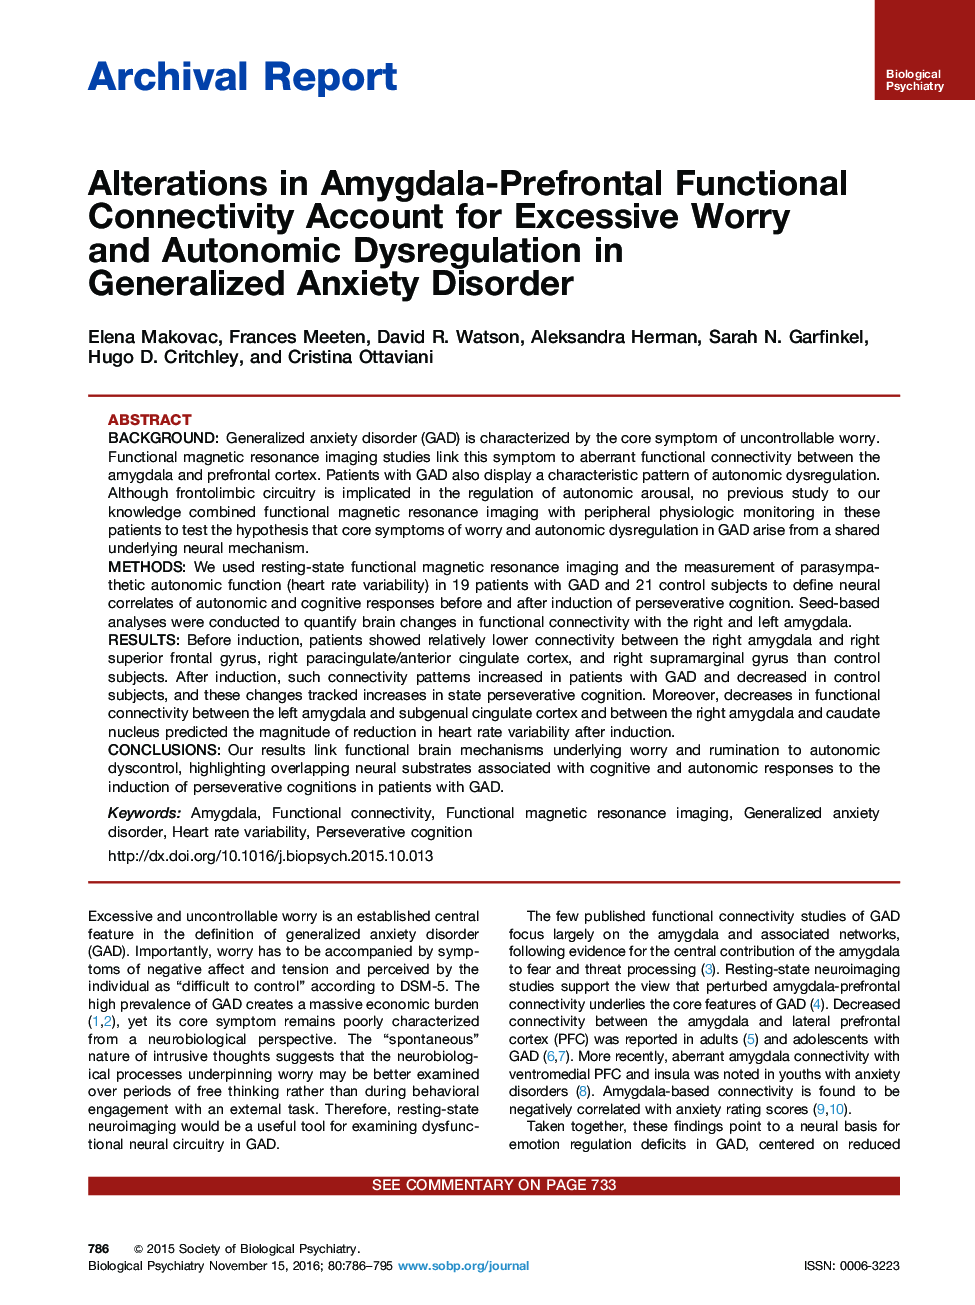 Archival ReportAlterations in Amygdala-Prefrontal Functional Connectivity Account for Excessive Worry and Autonomic Dysregulation in Generalized Anxiety Disorder